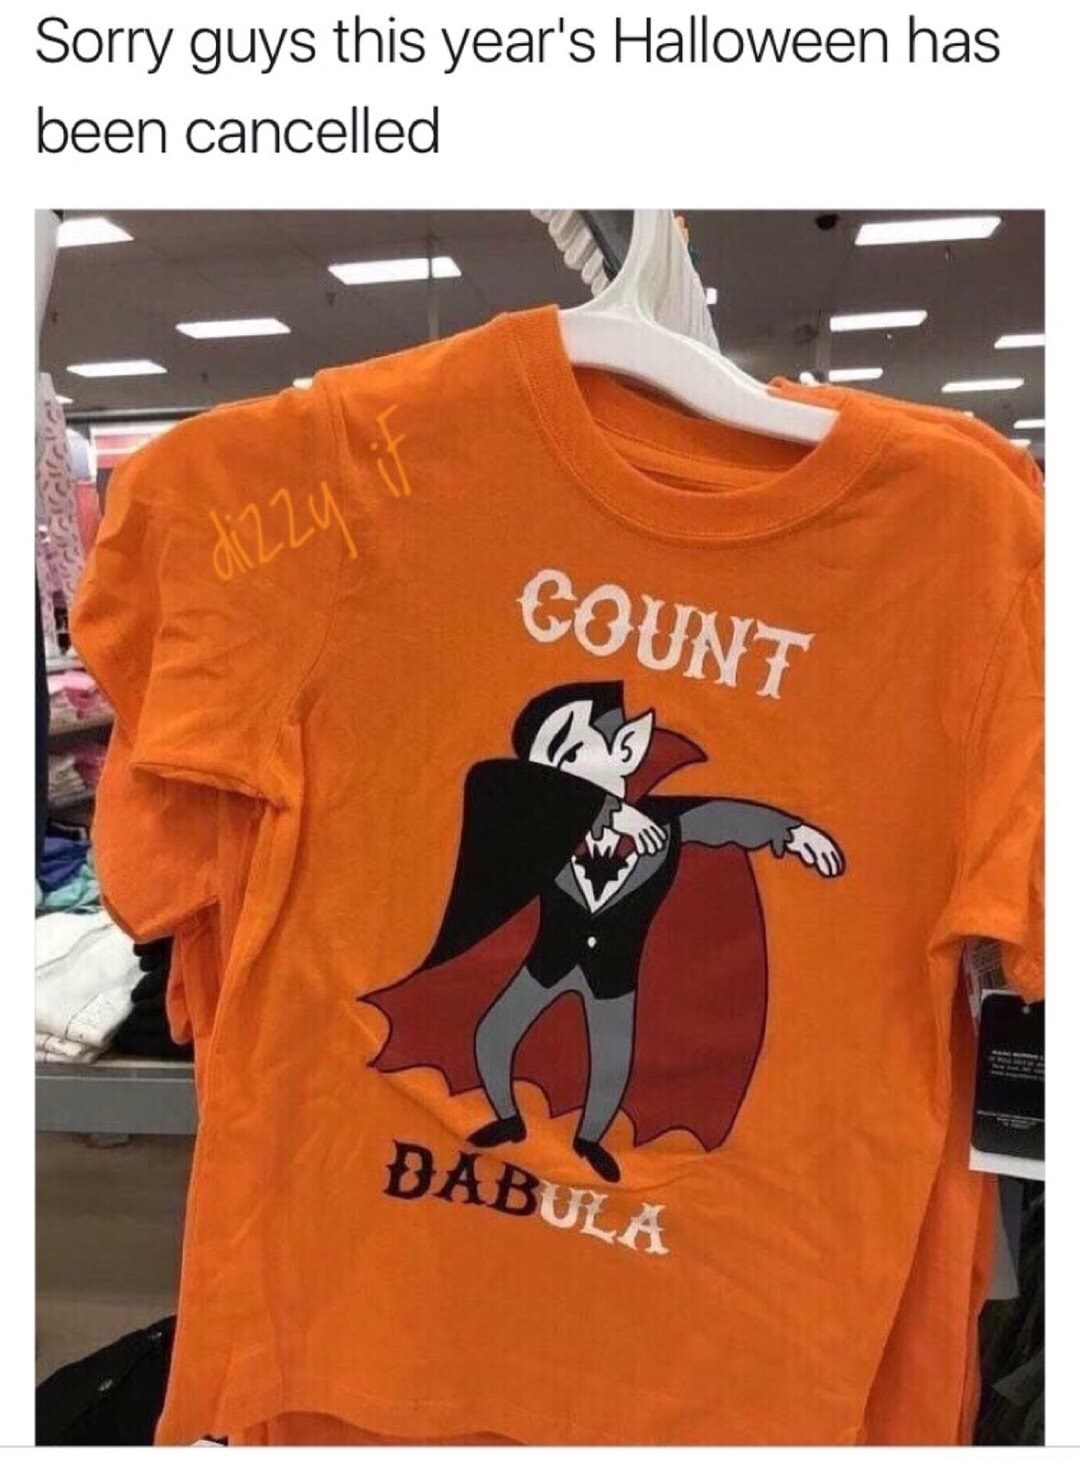 count dabula shirt - Sorry guys this year's Halloween has been cancelled Count Dabula